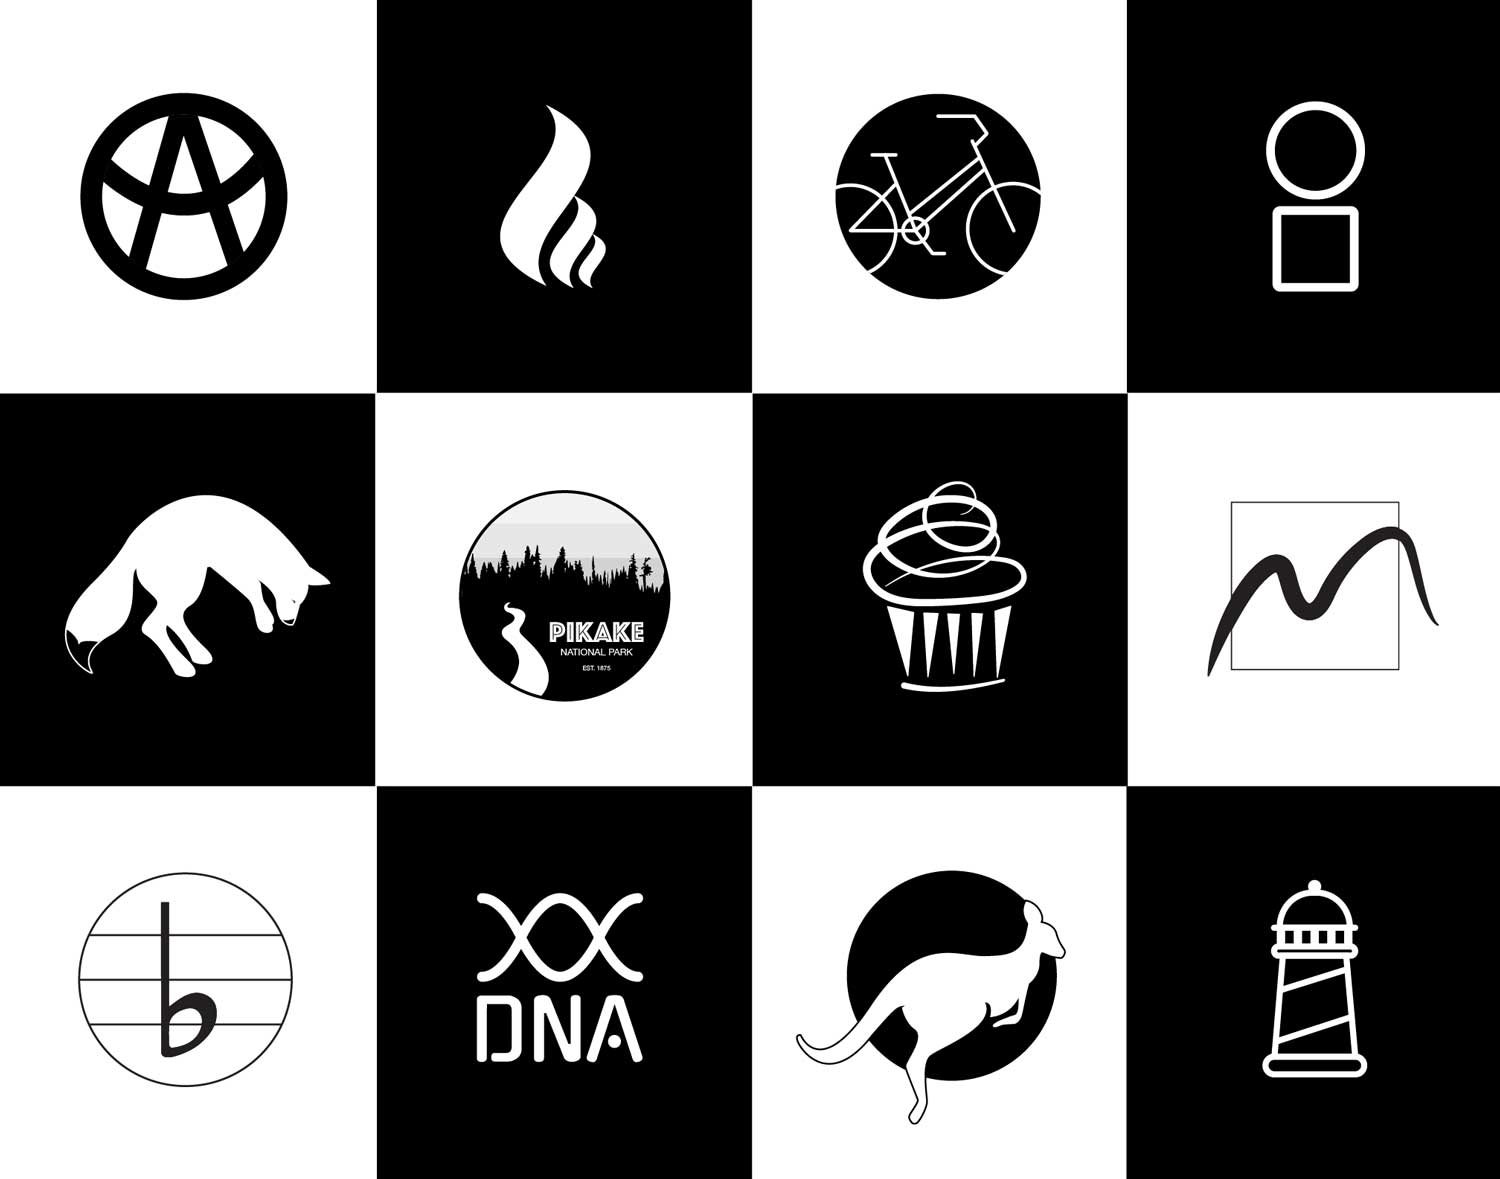 Grid of black and white logo designs